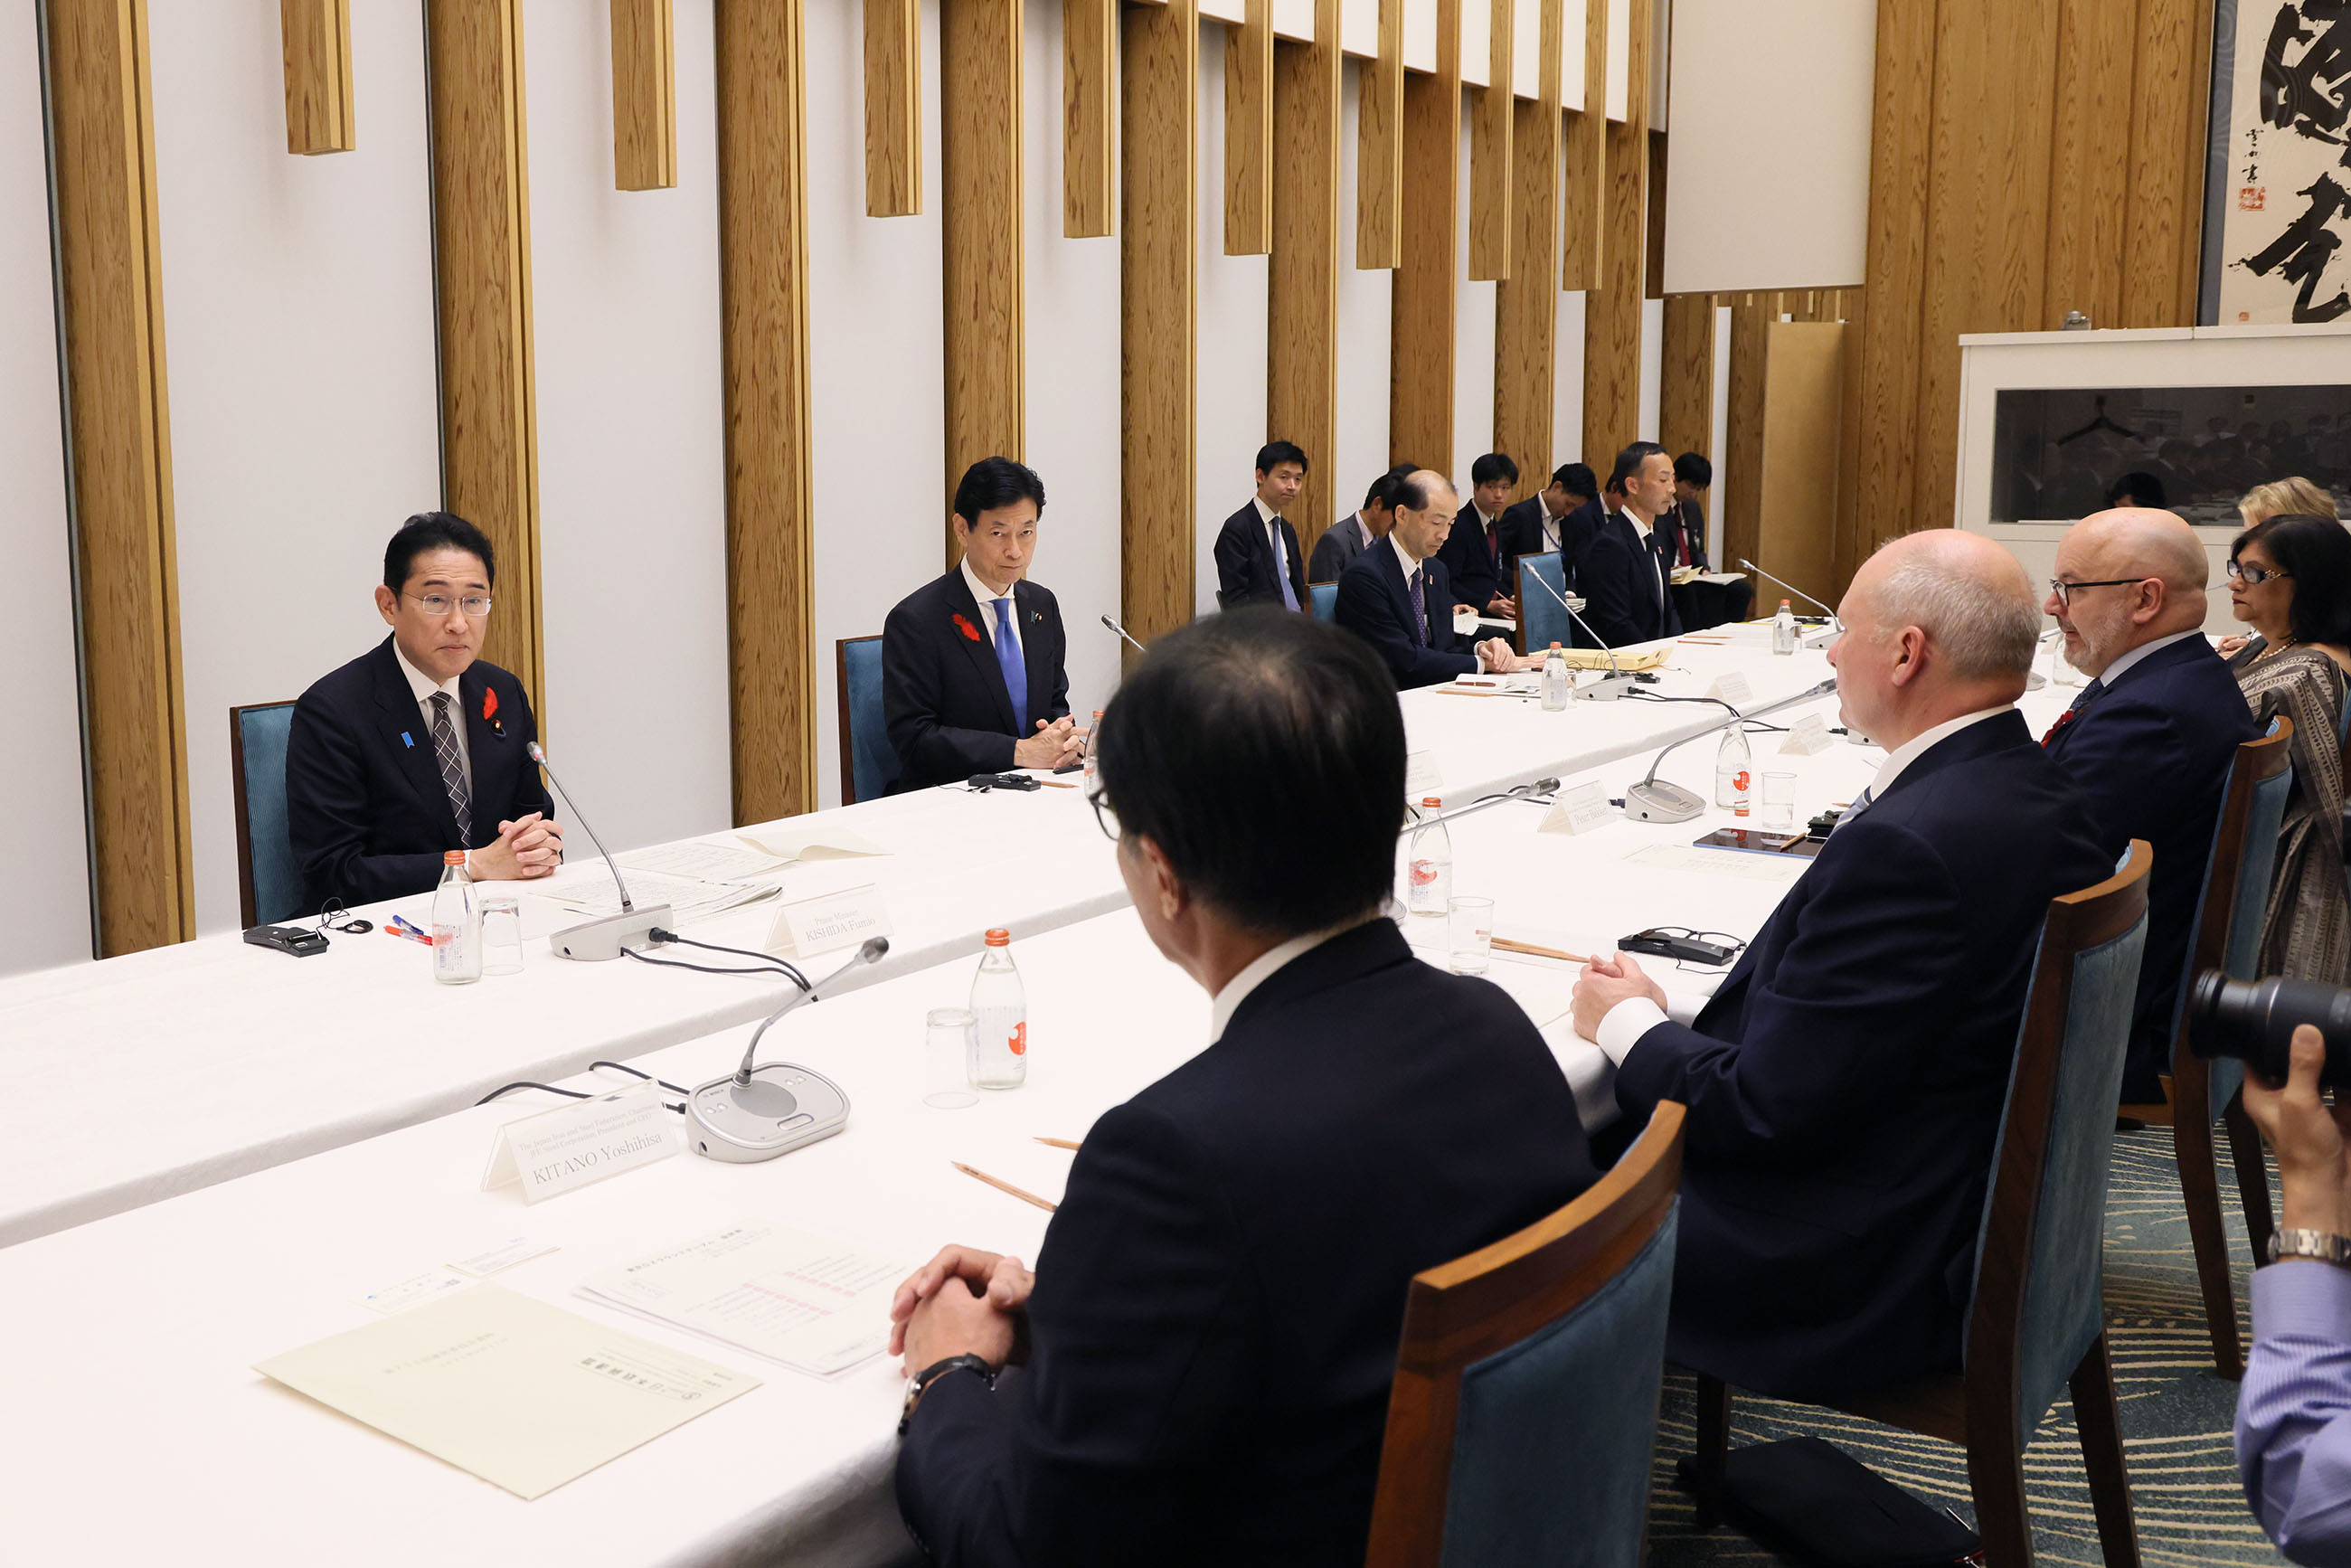 Prime Minister Kishida participating in the roundtable (2)